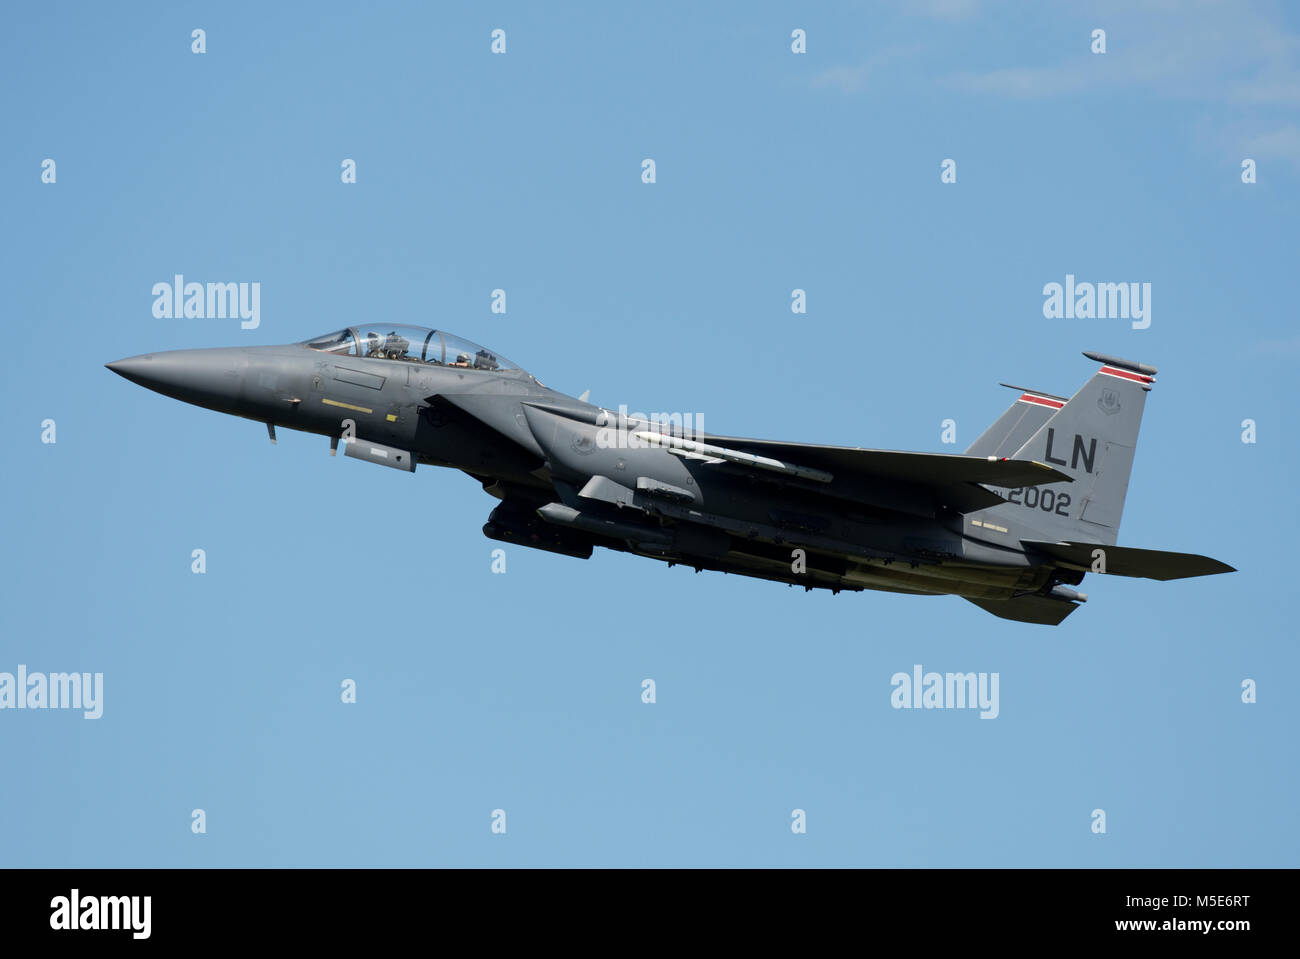 McDonnell Douglas F-15E Strike Eagle, 01-2002, 48th Fighter Wing, 494 Fighter Squadron, USAFE, based and seen at RAF Lakenheath, Suffolk Stock Photo